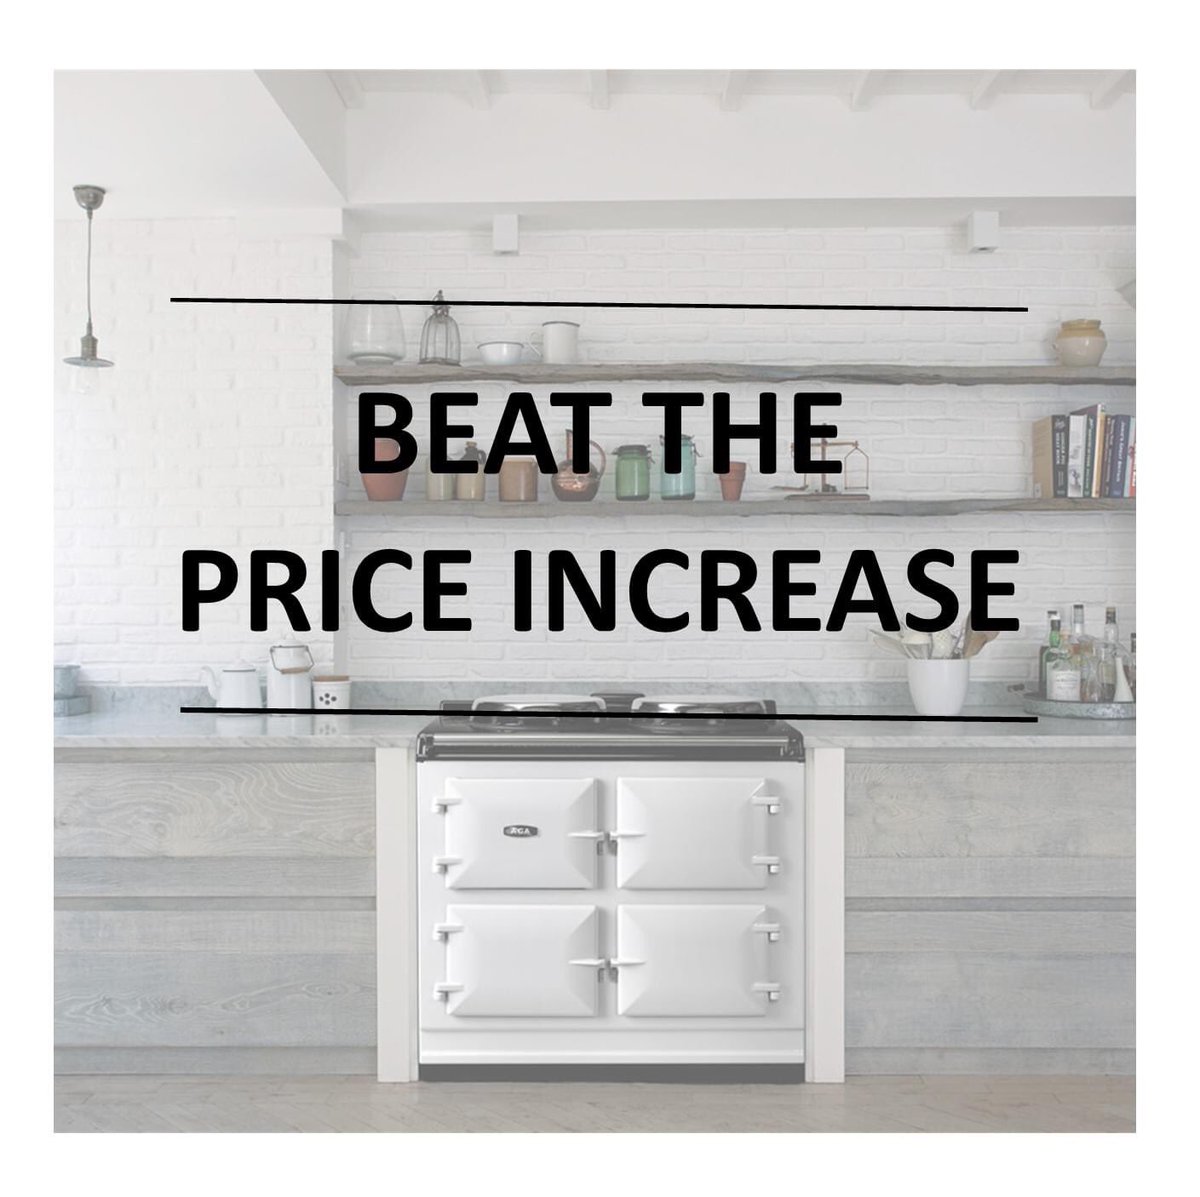 SAVE ££££'s when you buy a NEW AGA Cooker before 1st April. There's an AGA for every cook and every kitchen, it is important that you choose the one that's best suited to your lifestyle. @aga_cookers #agaoffers #agalife #heartofthehome #agacooking #castironcooking #electric